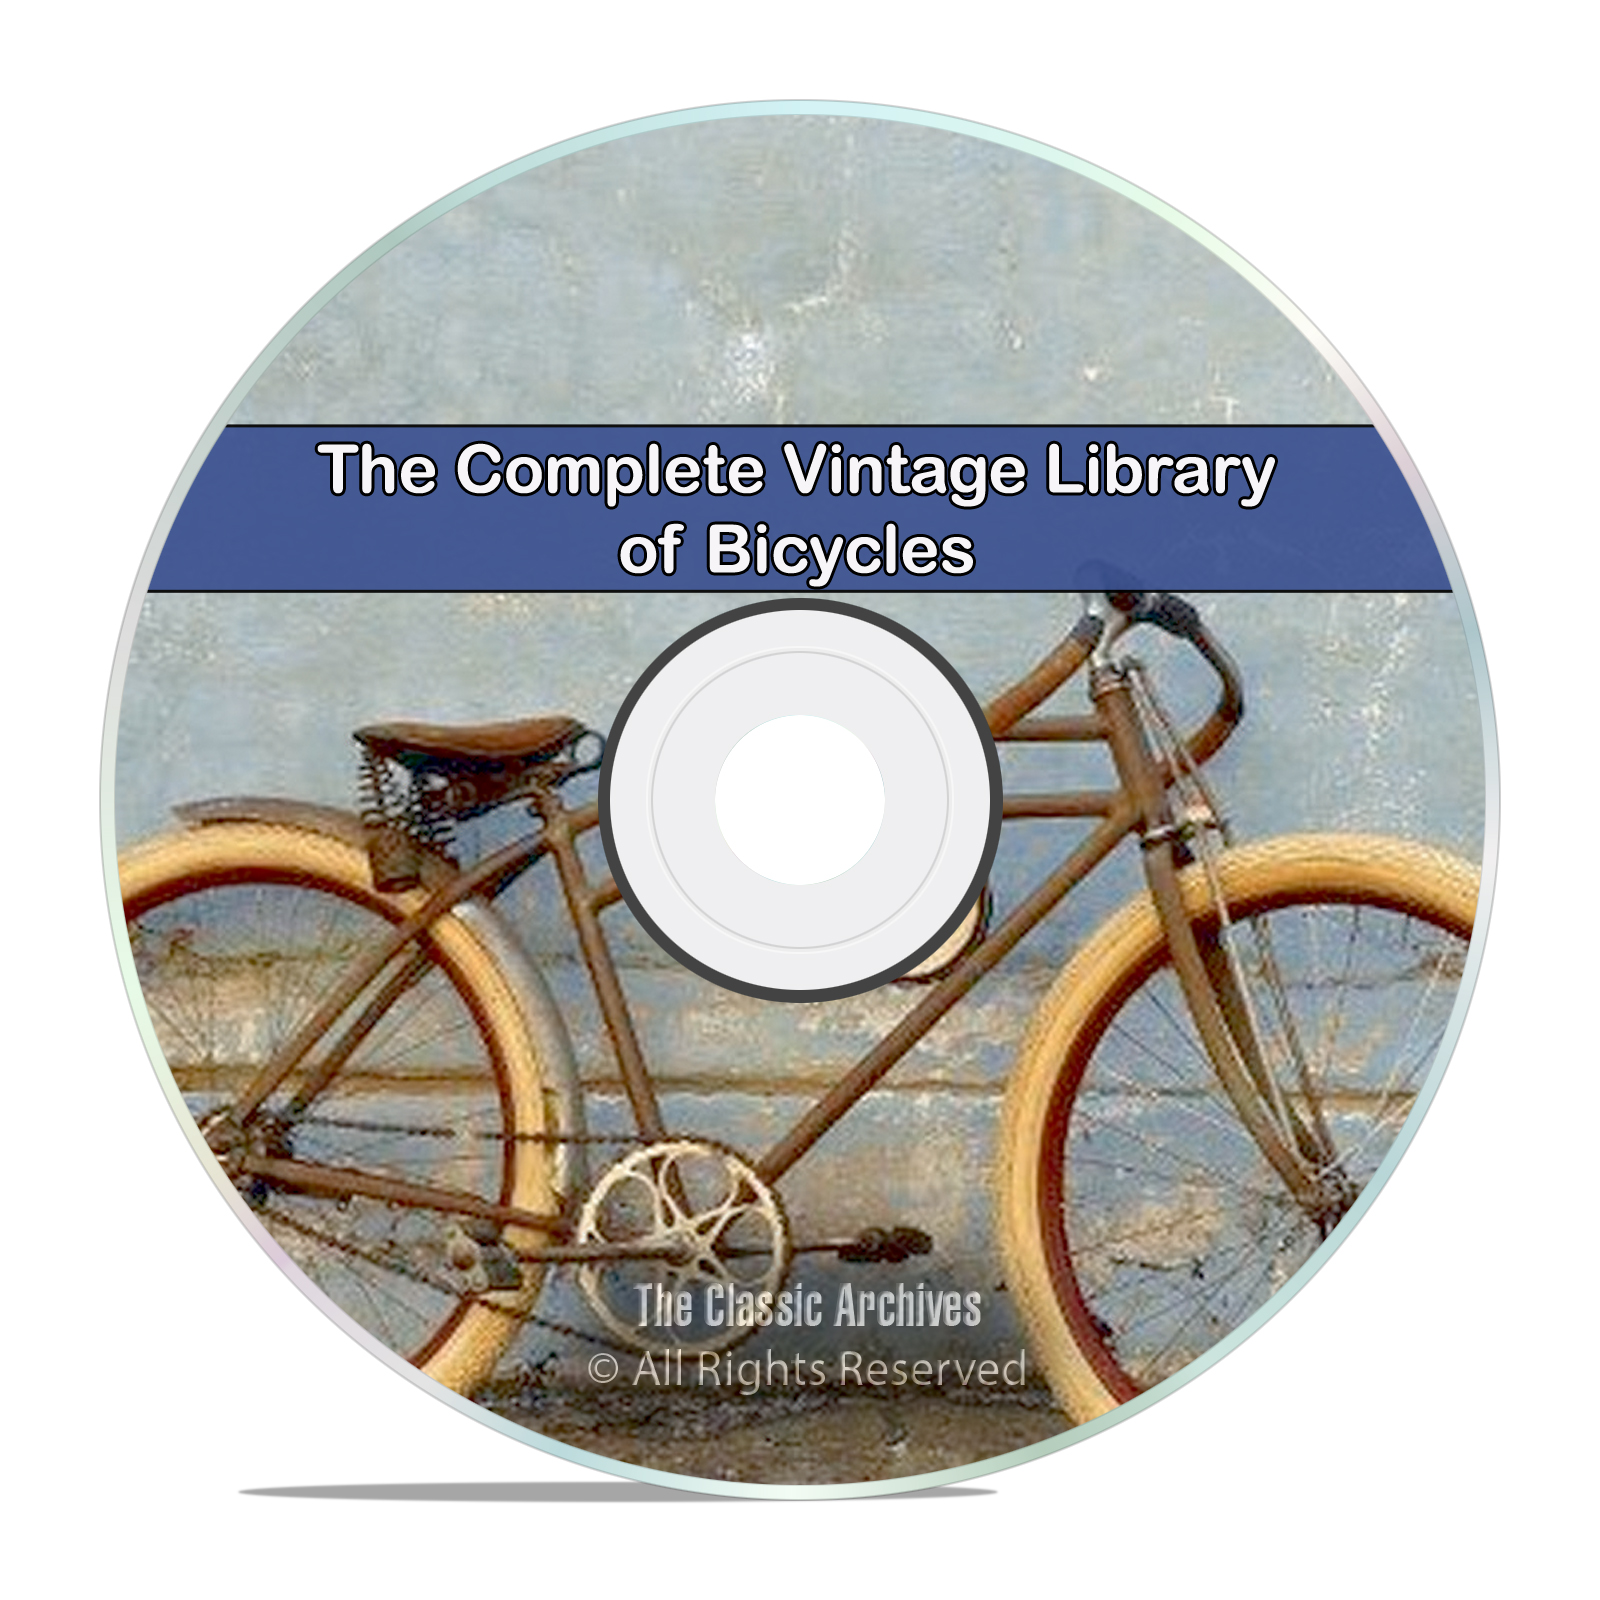 Library of Vintage Bicycles, 53 Books, Tricycle, How to Build, Repair CD